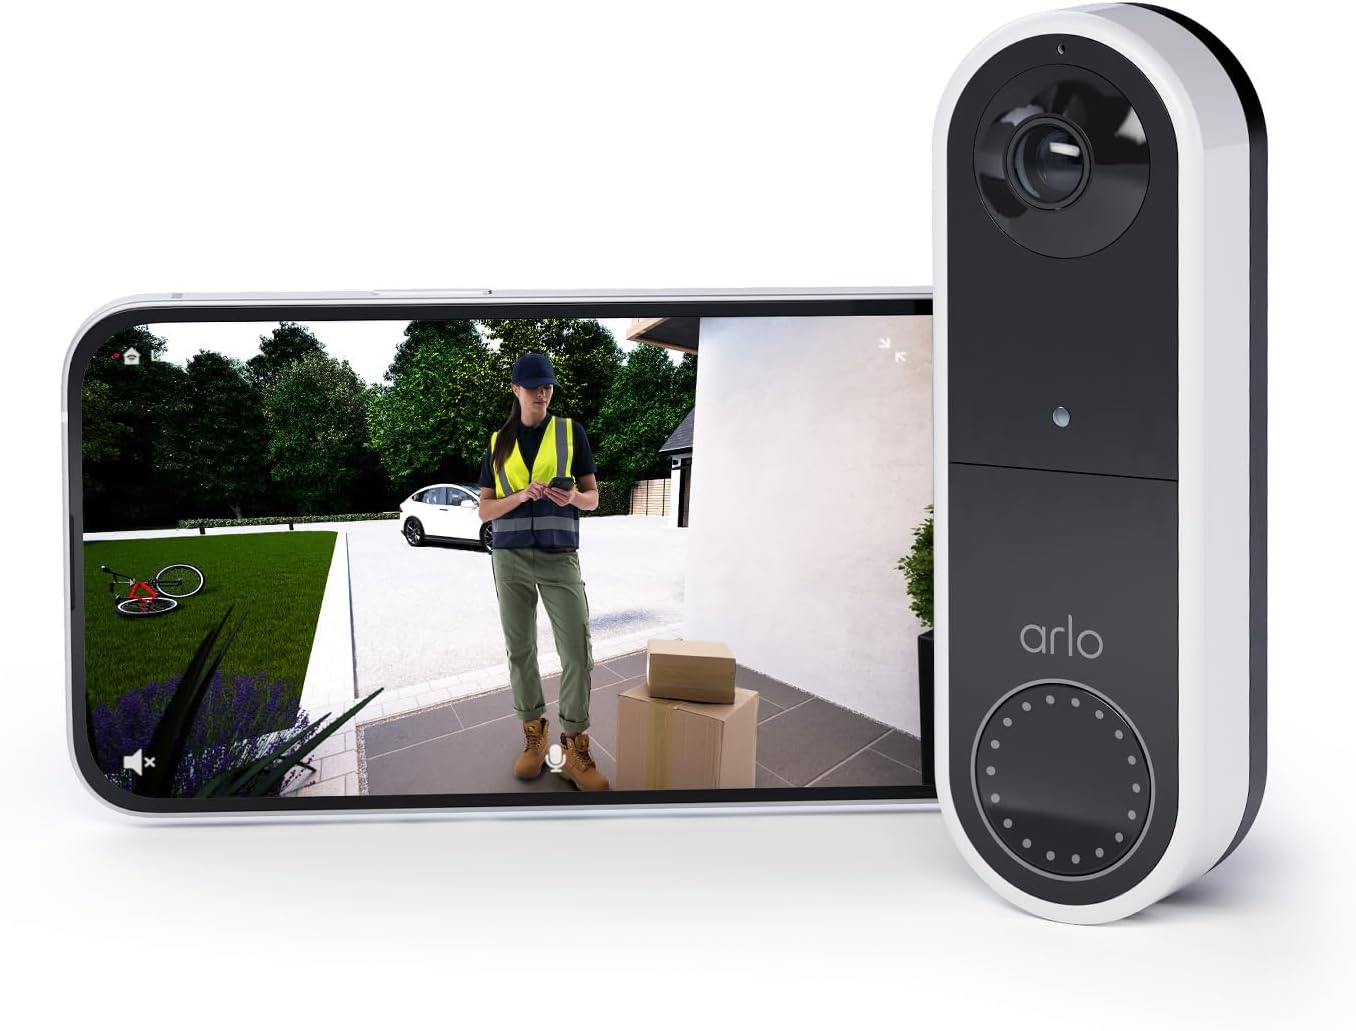 The image shows a smart doorbell device with a camera—specifically, an Arlo Essential Doorbell. Displayed on the doorbell's camera view is a person standing on a front porch, possibly a delivery person, as they seem to be next to a package. The person is wearing a vest, which is often part of a delivery uniform, and they appear to be using a handheld device, maybe for capturing delivery confirmations. In the background, there's a bicycle laid on the ground, a parked car, and residential surroundings indicating the doorbell is installed at a private residence. This type of smart doorbell often provides homeowners with real-time alerts, video footage, and communication with visitors via a smartphone app.